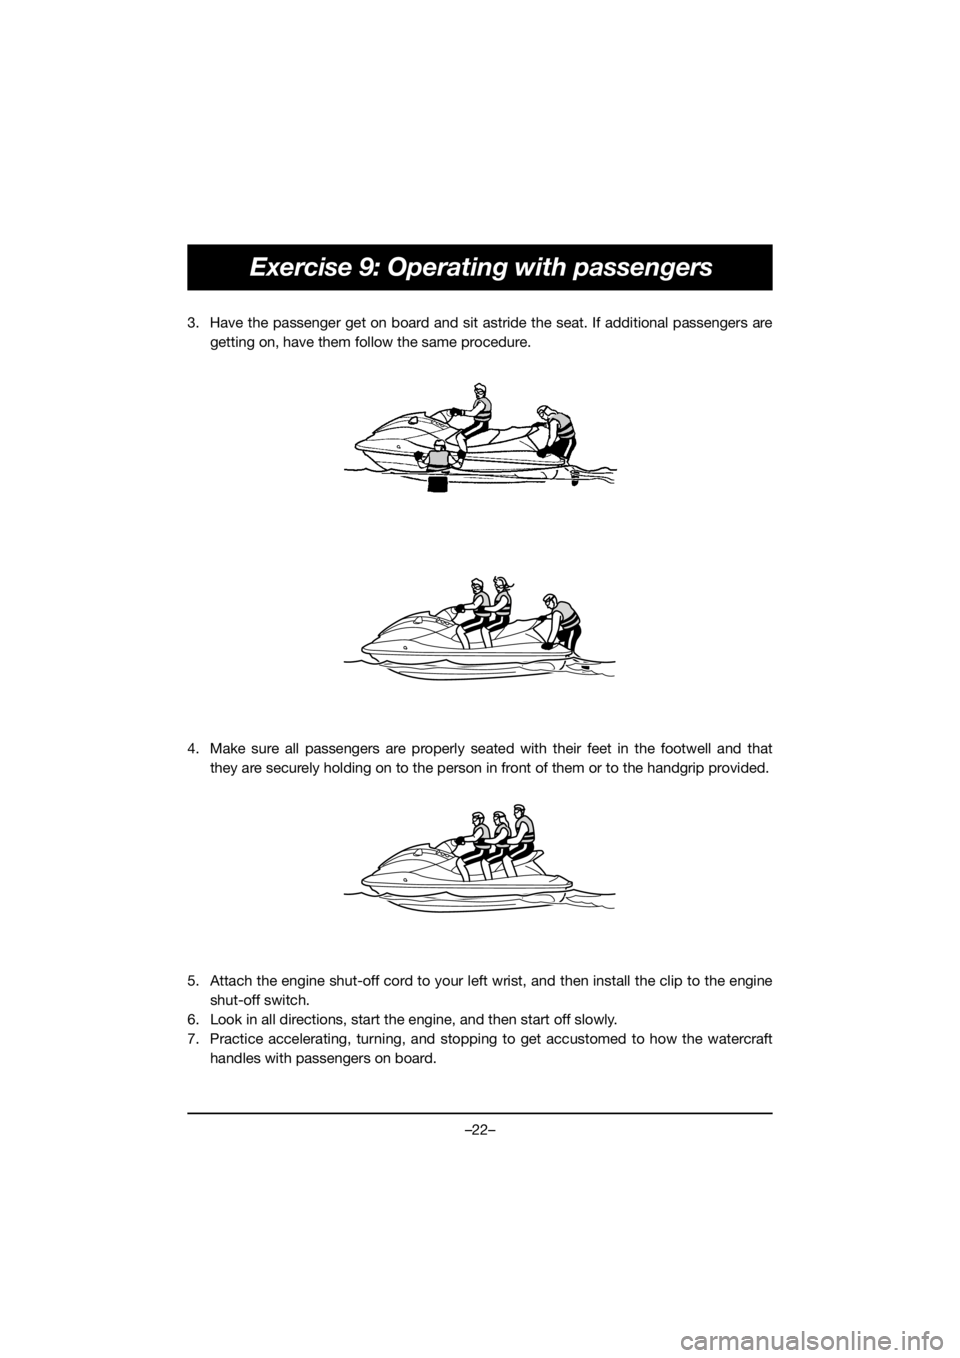 YAMAHA EX SPORT 2020  Manual de utilização (in Portuguese) –22–
Exercise 9: Operating with passengers
3. Have the passenger get on board and sit astride the seat. If additional passengers are
getting on, have them follow the same procedure. 
4. Make sure 